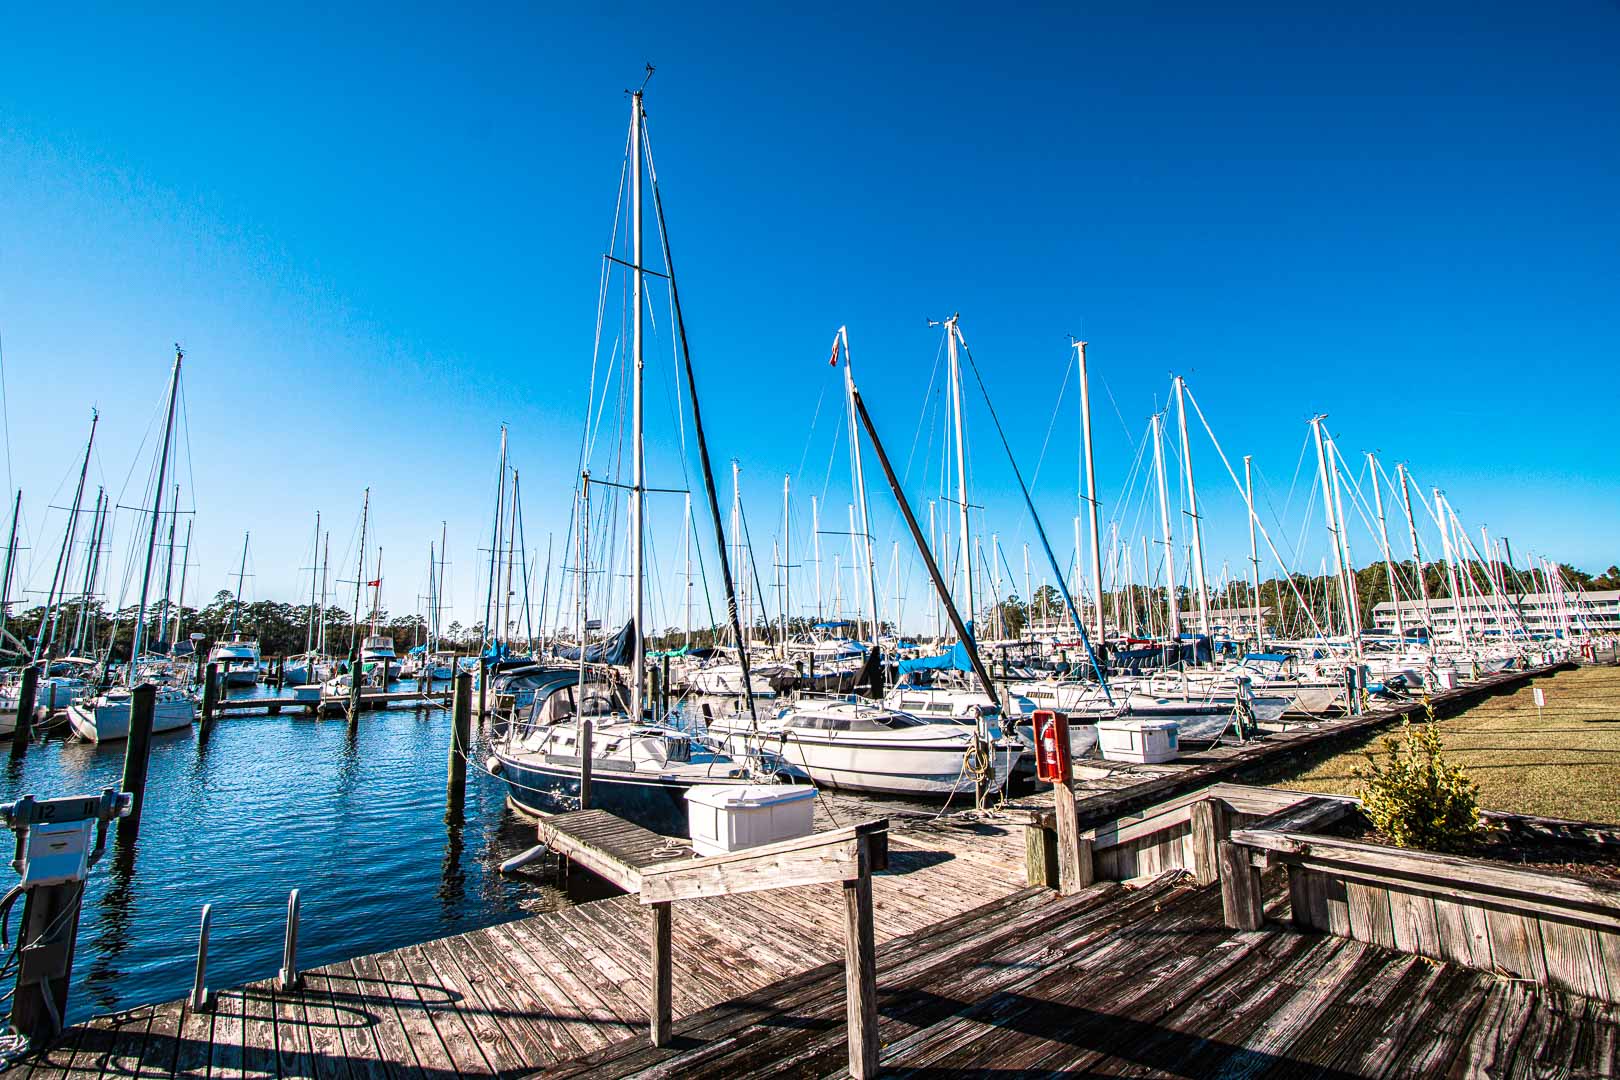 A relaxing view of the boat dock from VRI's Sandcastle Village in New Bern, North Carolina.